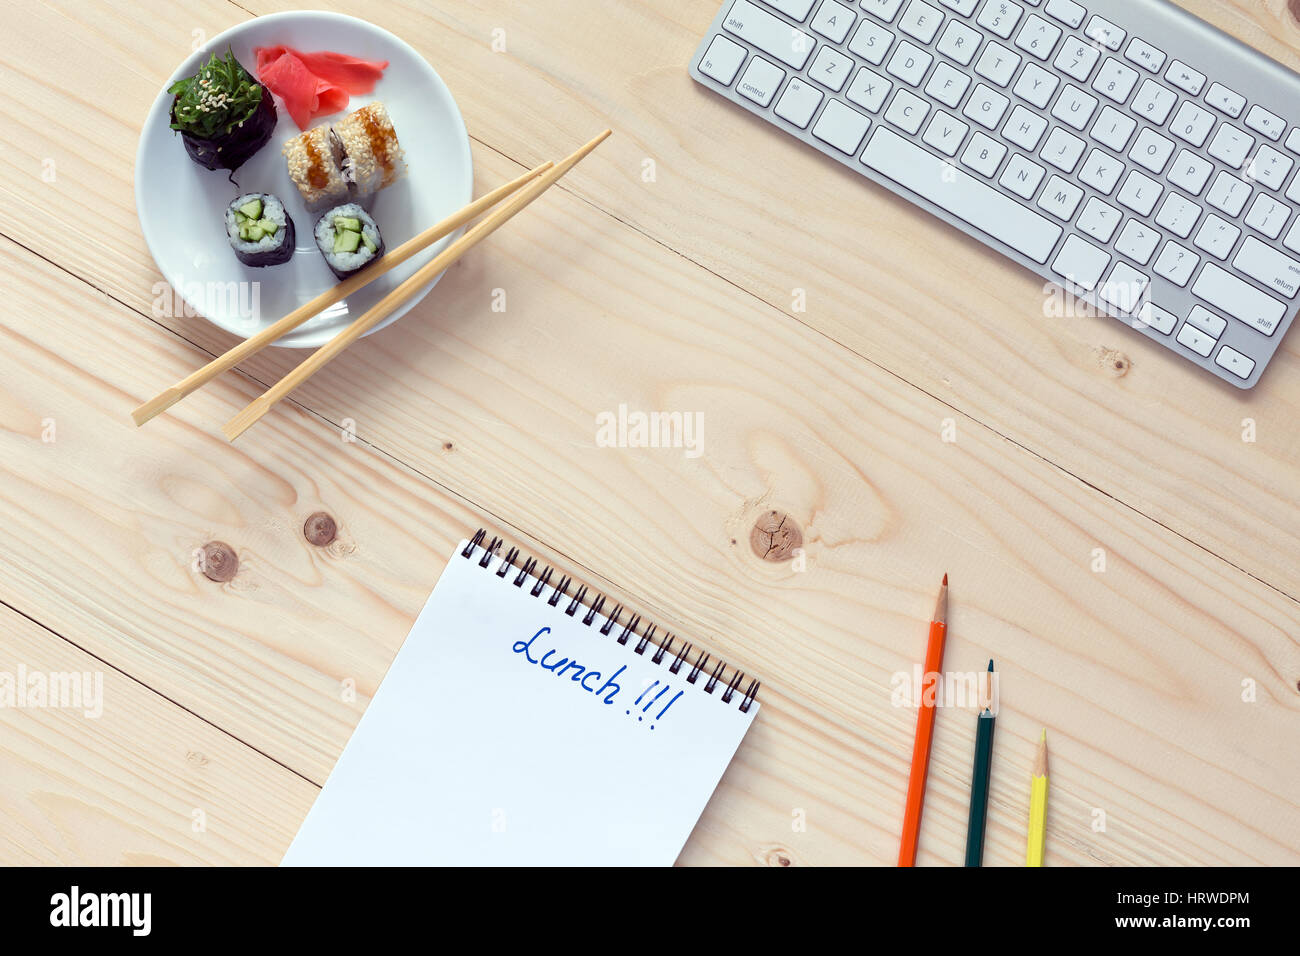 Savory looking fresh Sushi Set on white Plate with traditional Japanese Chopsticks Computer and Stationery opened Notepad with hand written Word Lunch Stock Photo